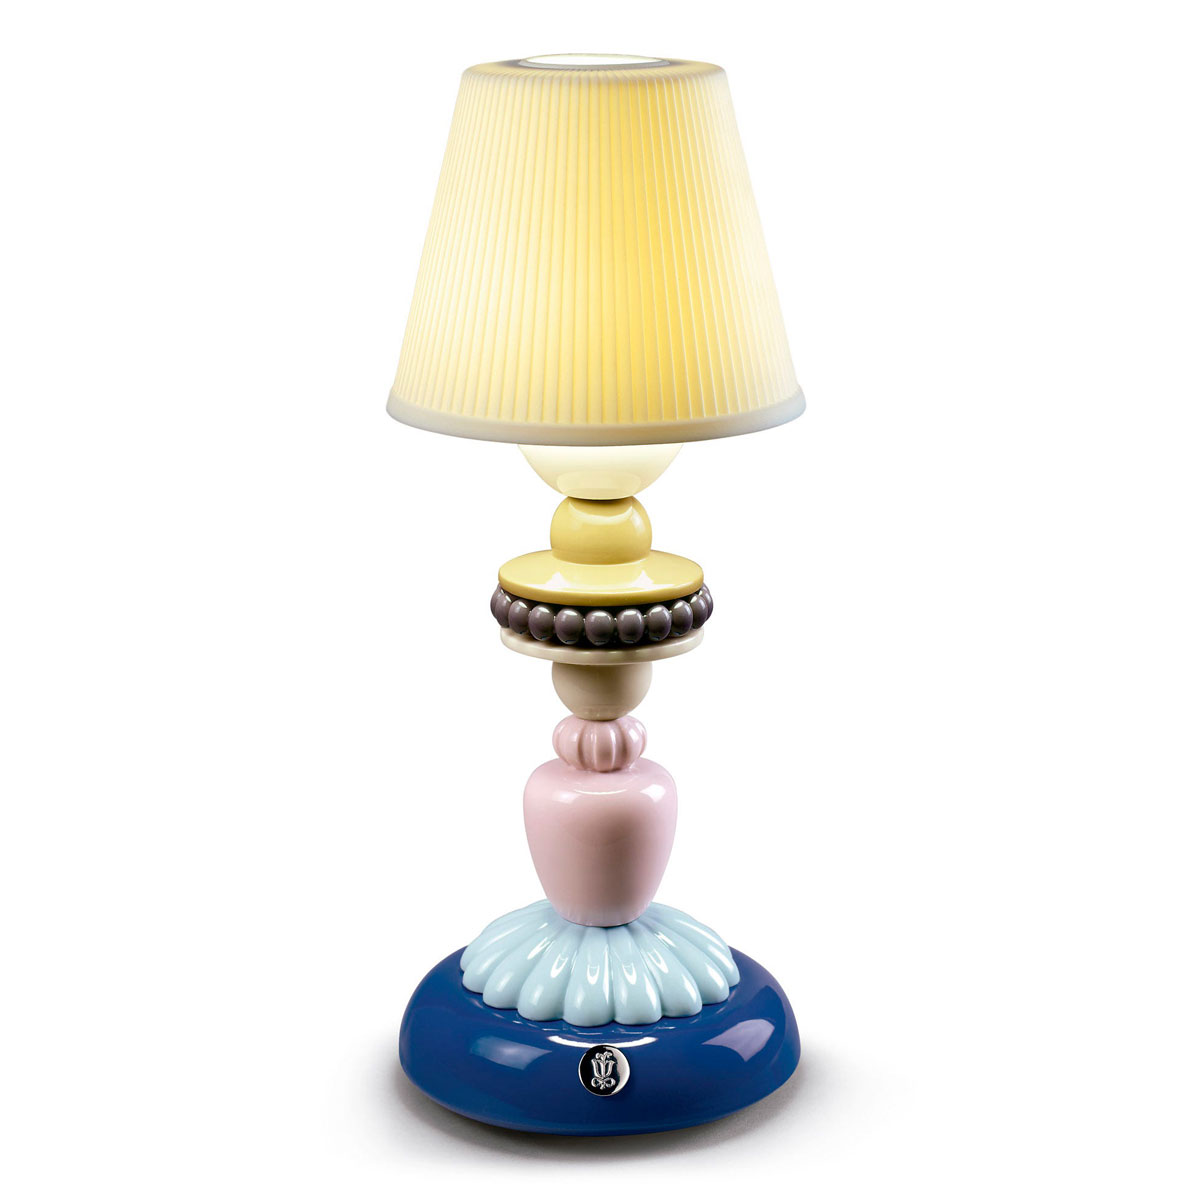 Lladro Light And Fragrance, Sunflower Firefly Table Lamp. Blue